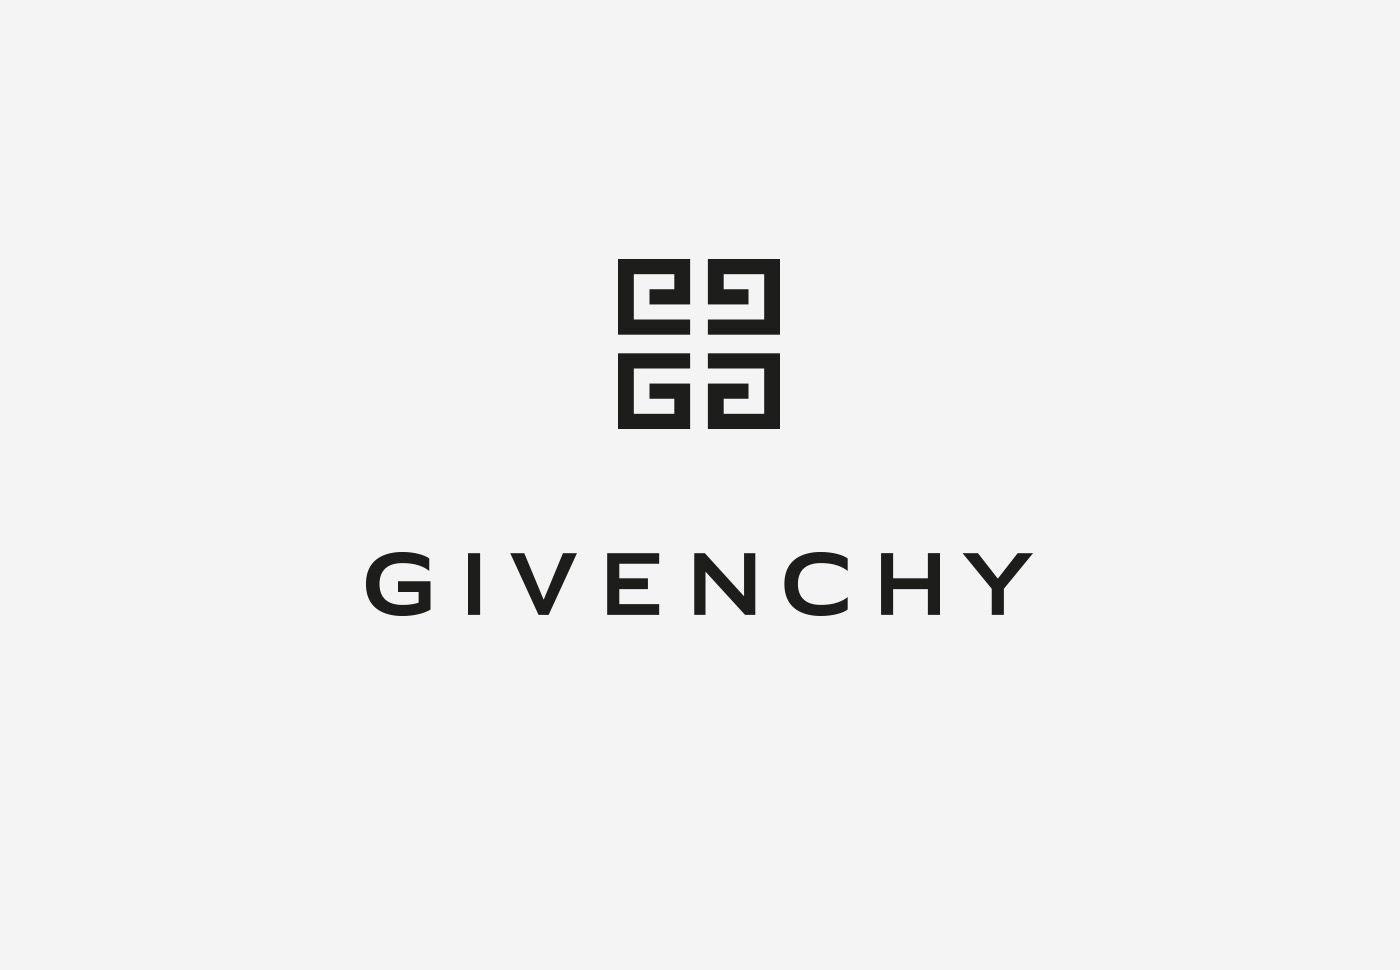 Givenchy – Creative direction and design consulting